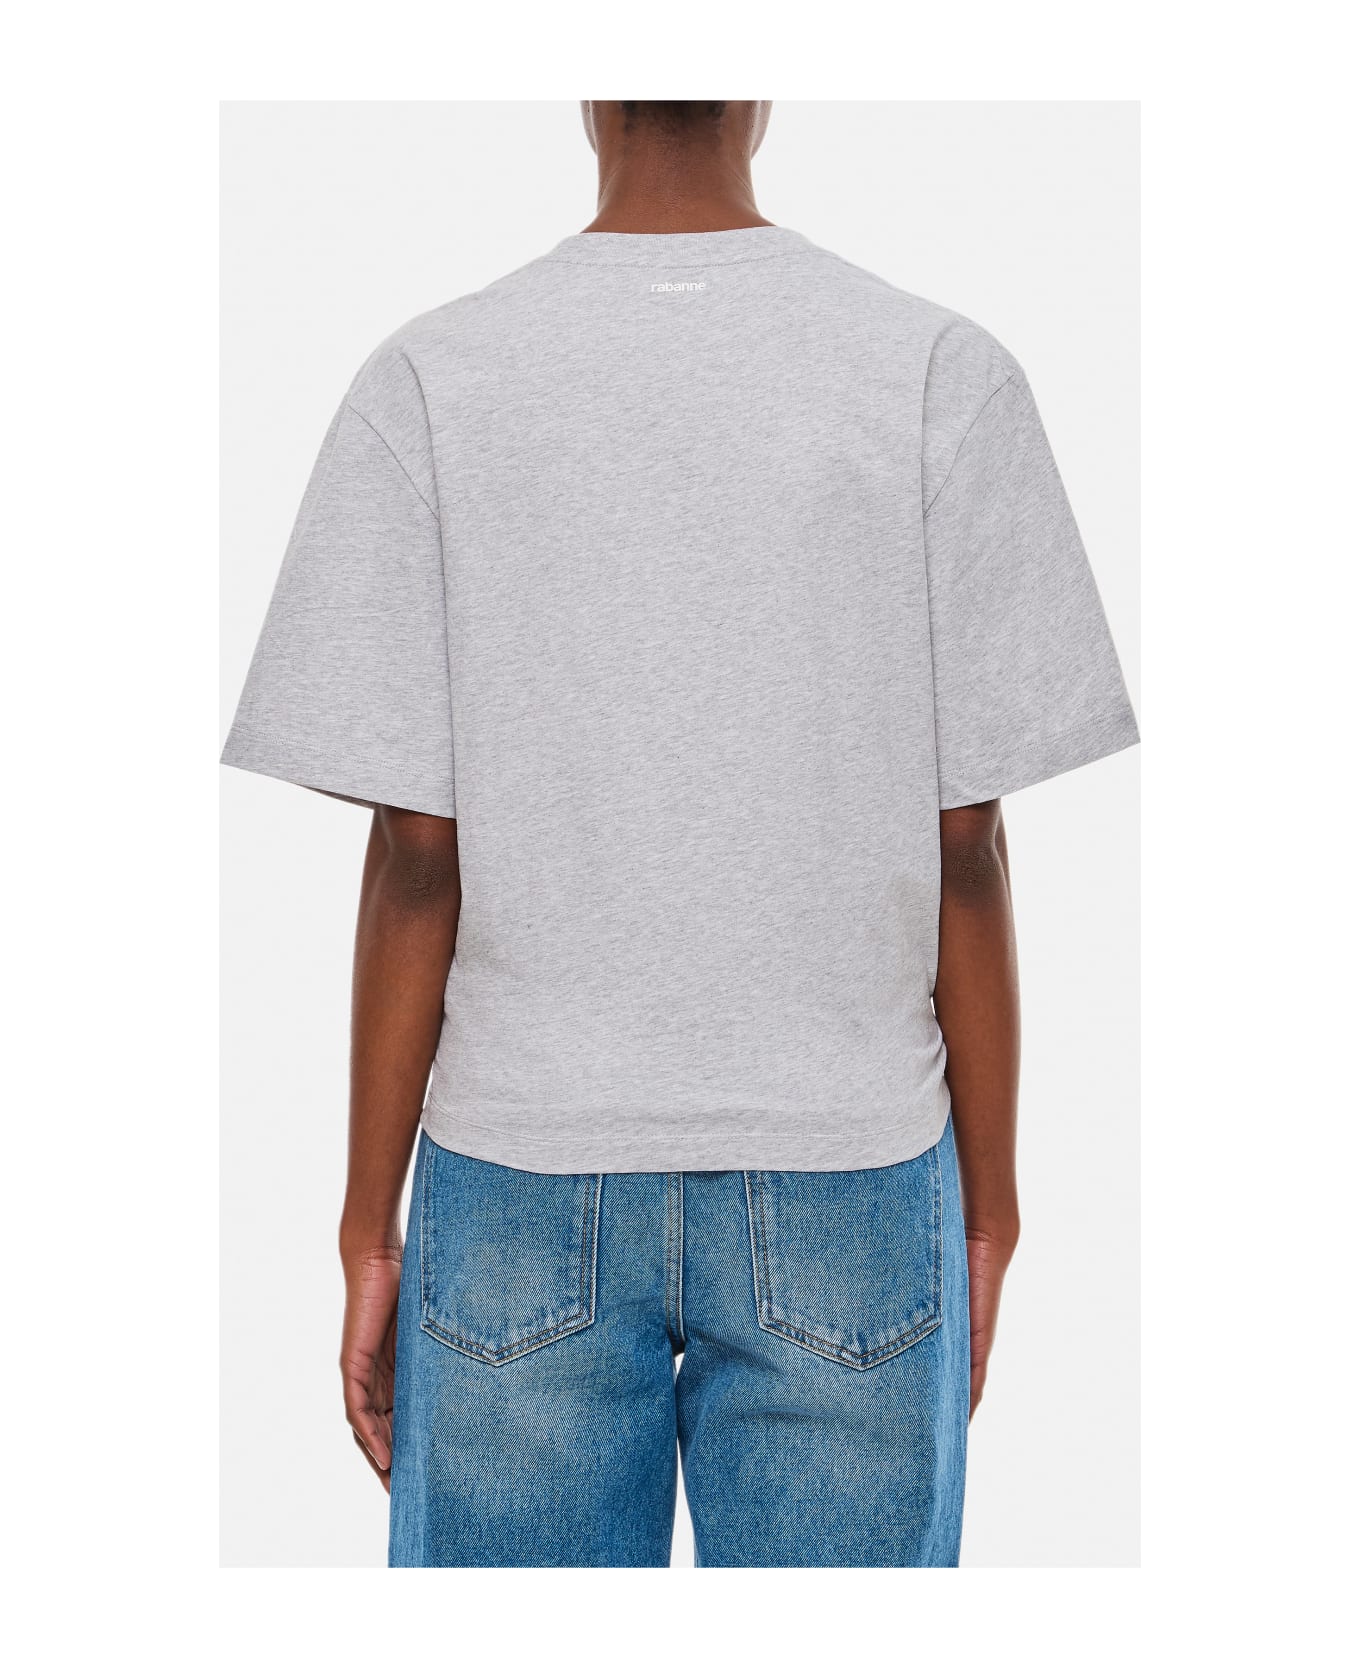 Paco Rabanne Cropped Cotton T-shirt - Grey